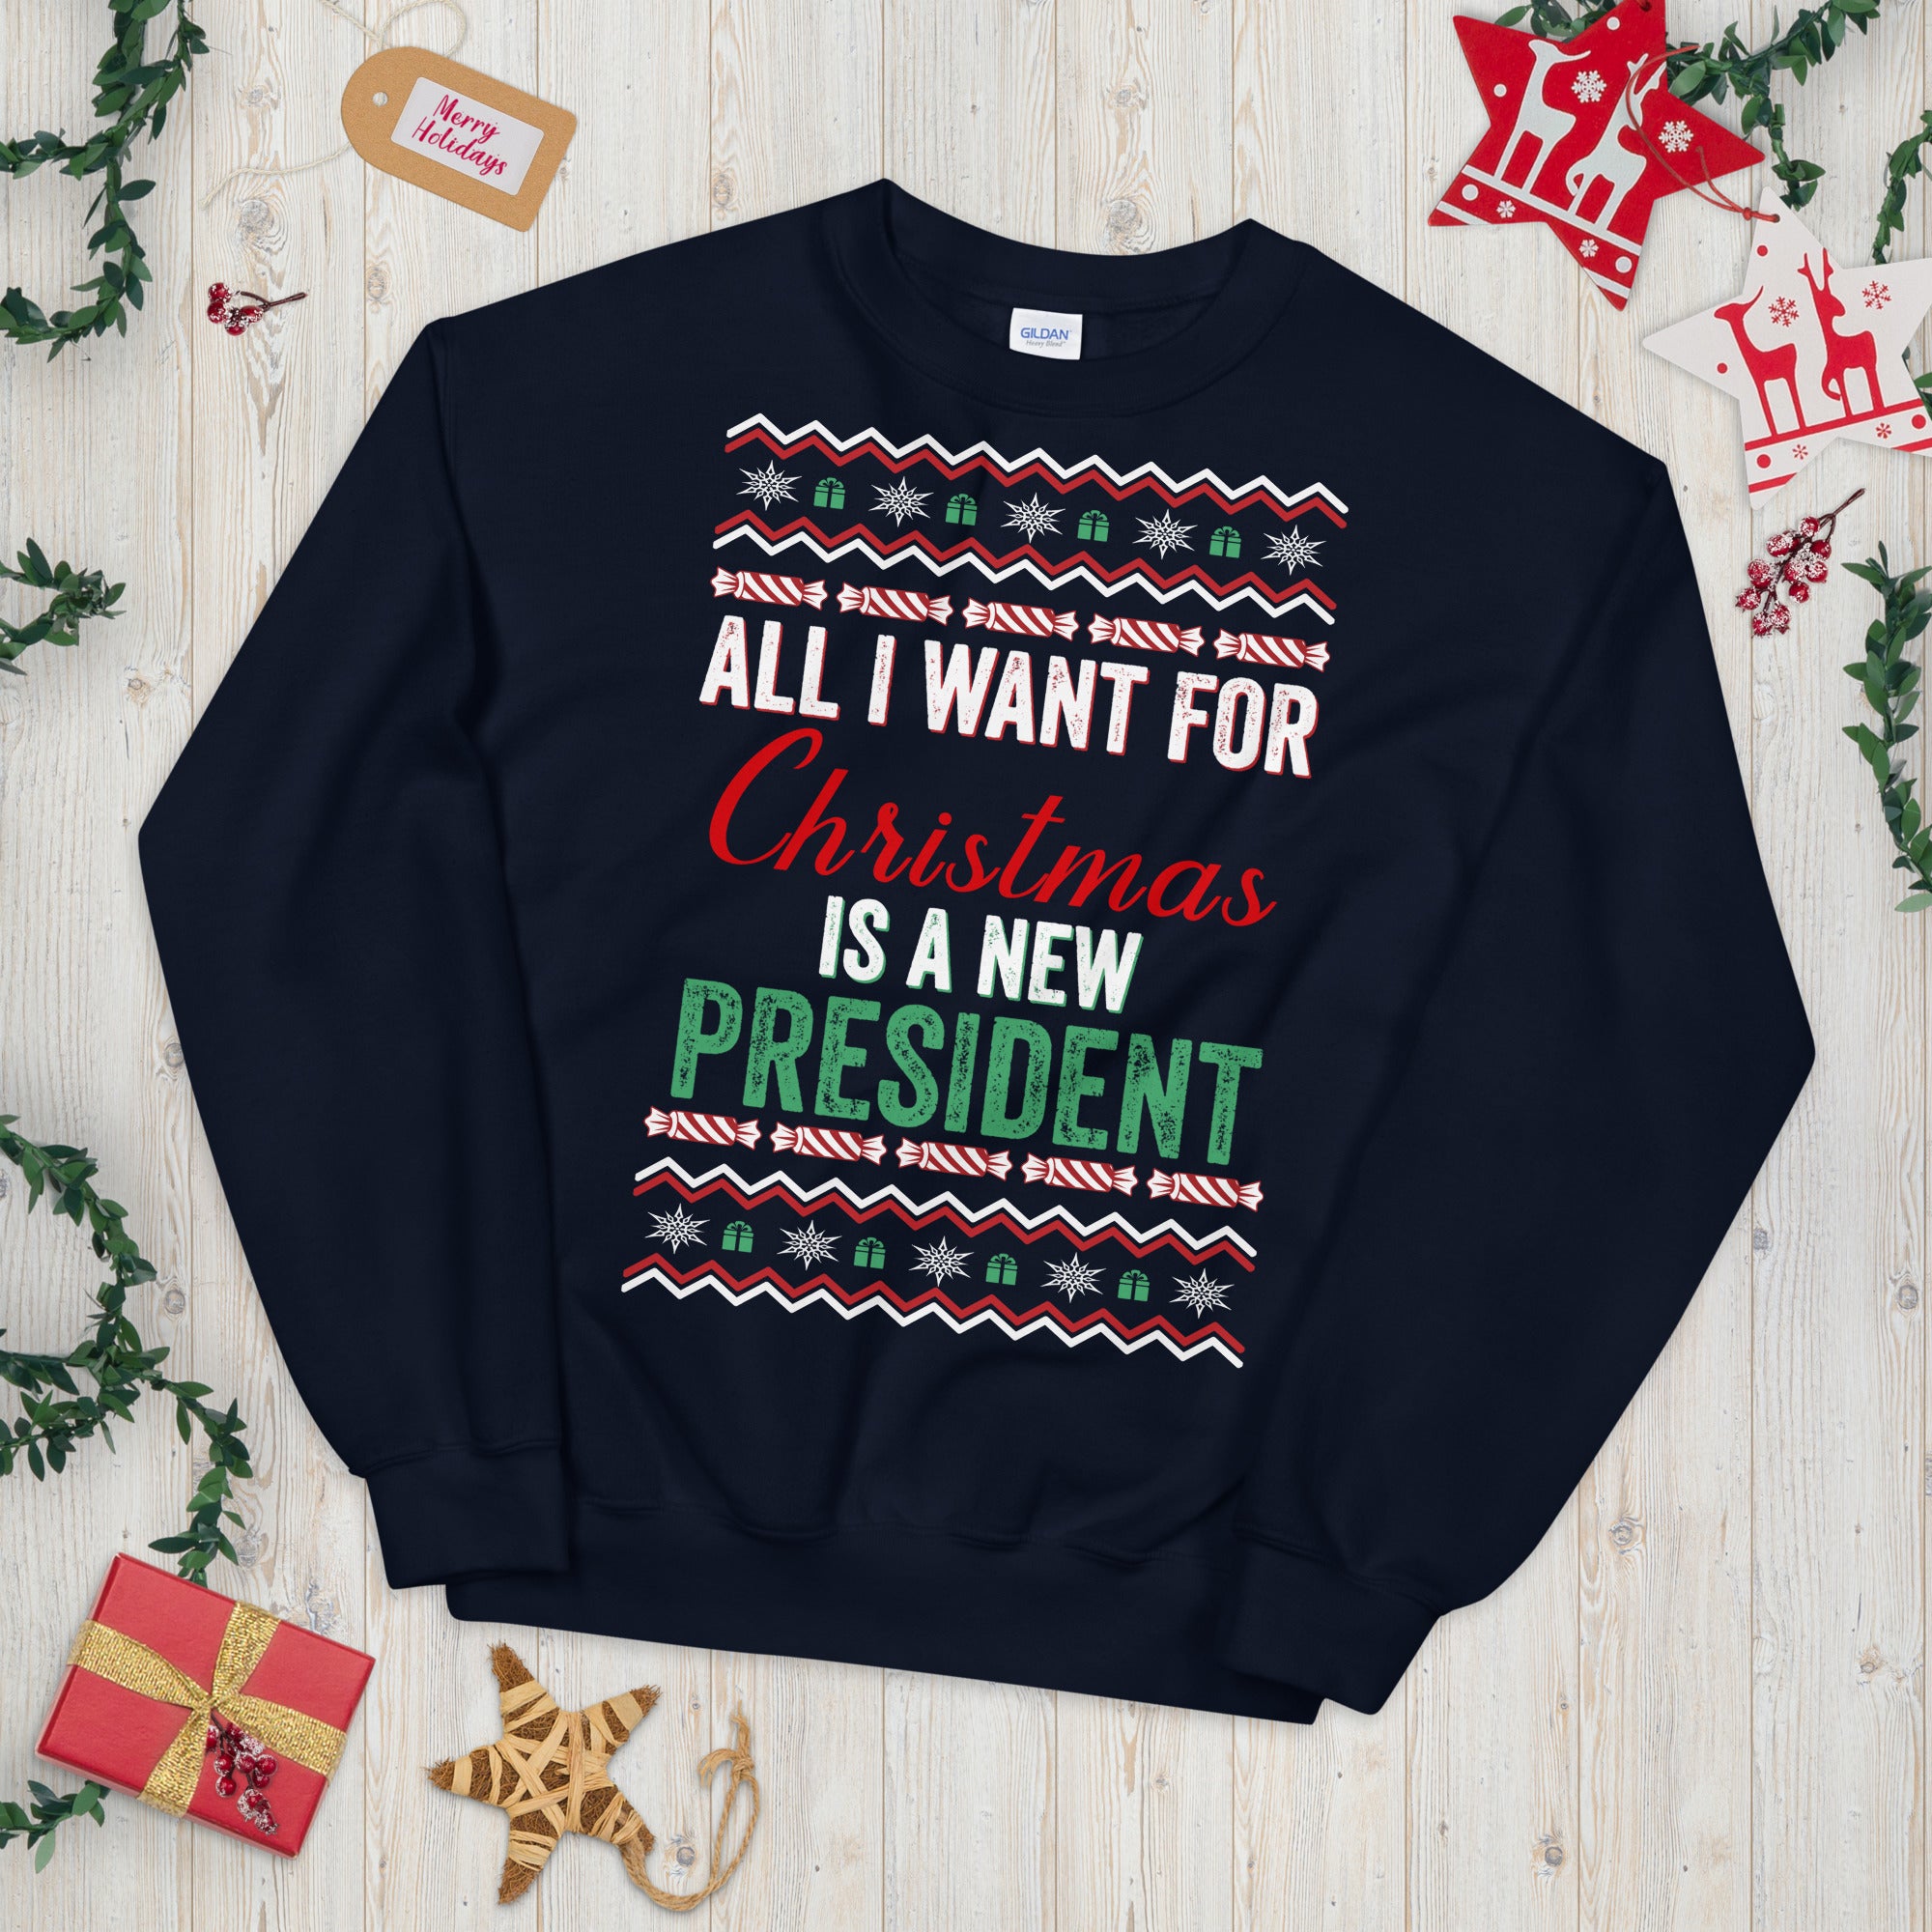 All I Want For Christmas Is A New President, FJB Christmas Sweatshirt, Anti Biden Christmas Sweatshirt, Conservative Sweatshirt, FJB Sweater - Madeinsea©